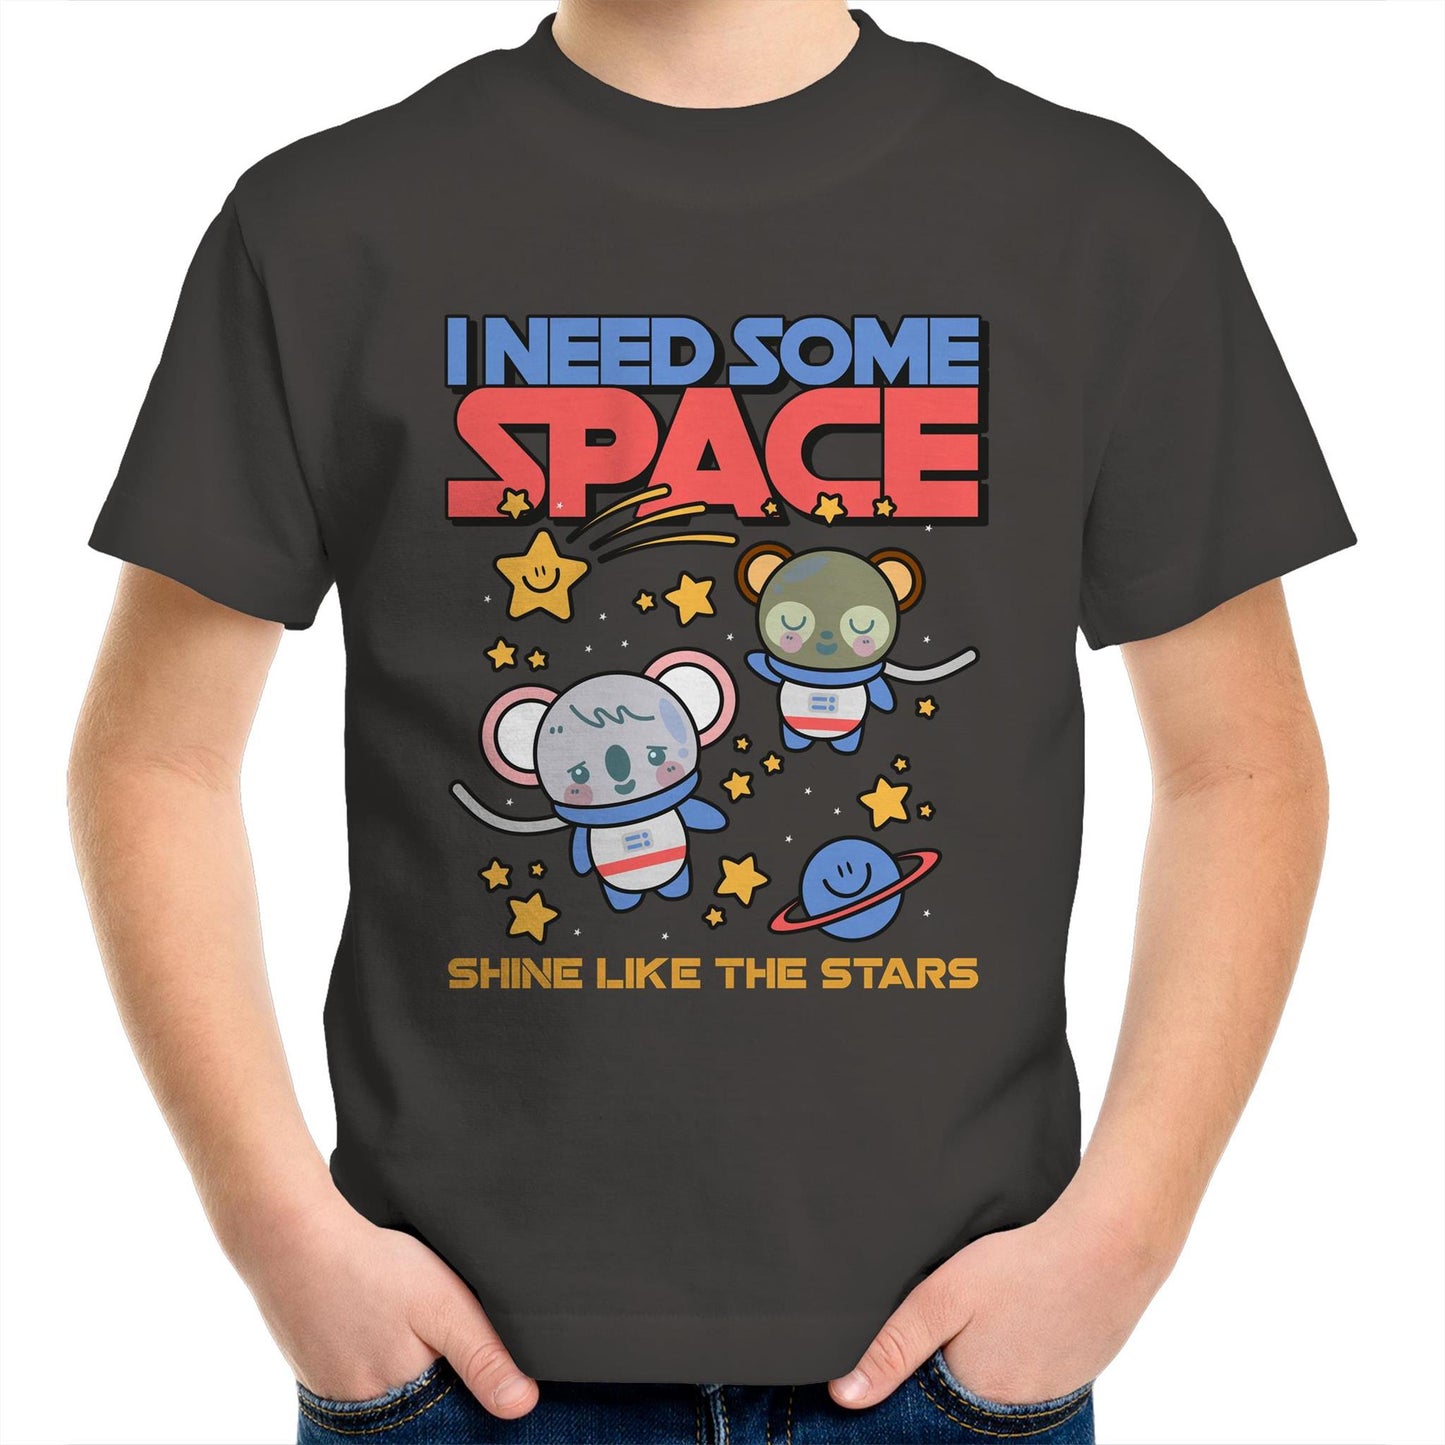 I Need Some Space - Kids Youth Crew T-Shirt Charcoal Kids Youth T-shirt Space